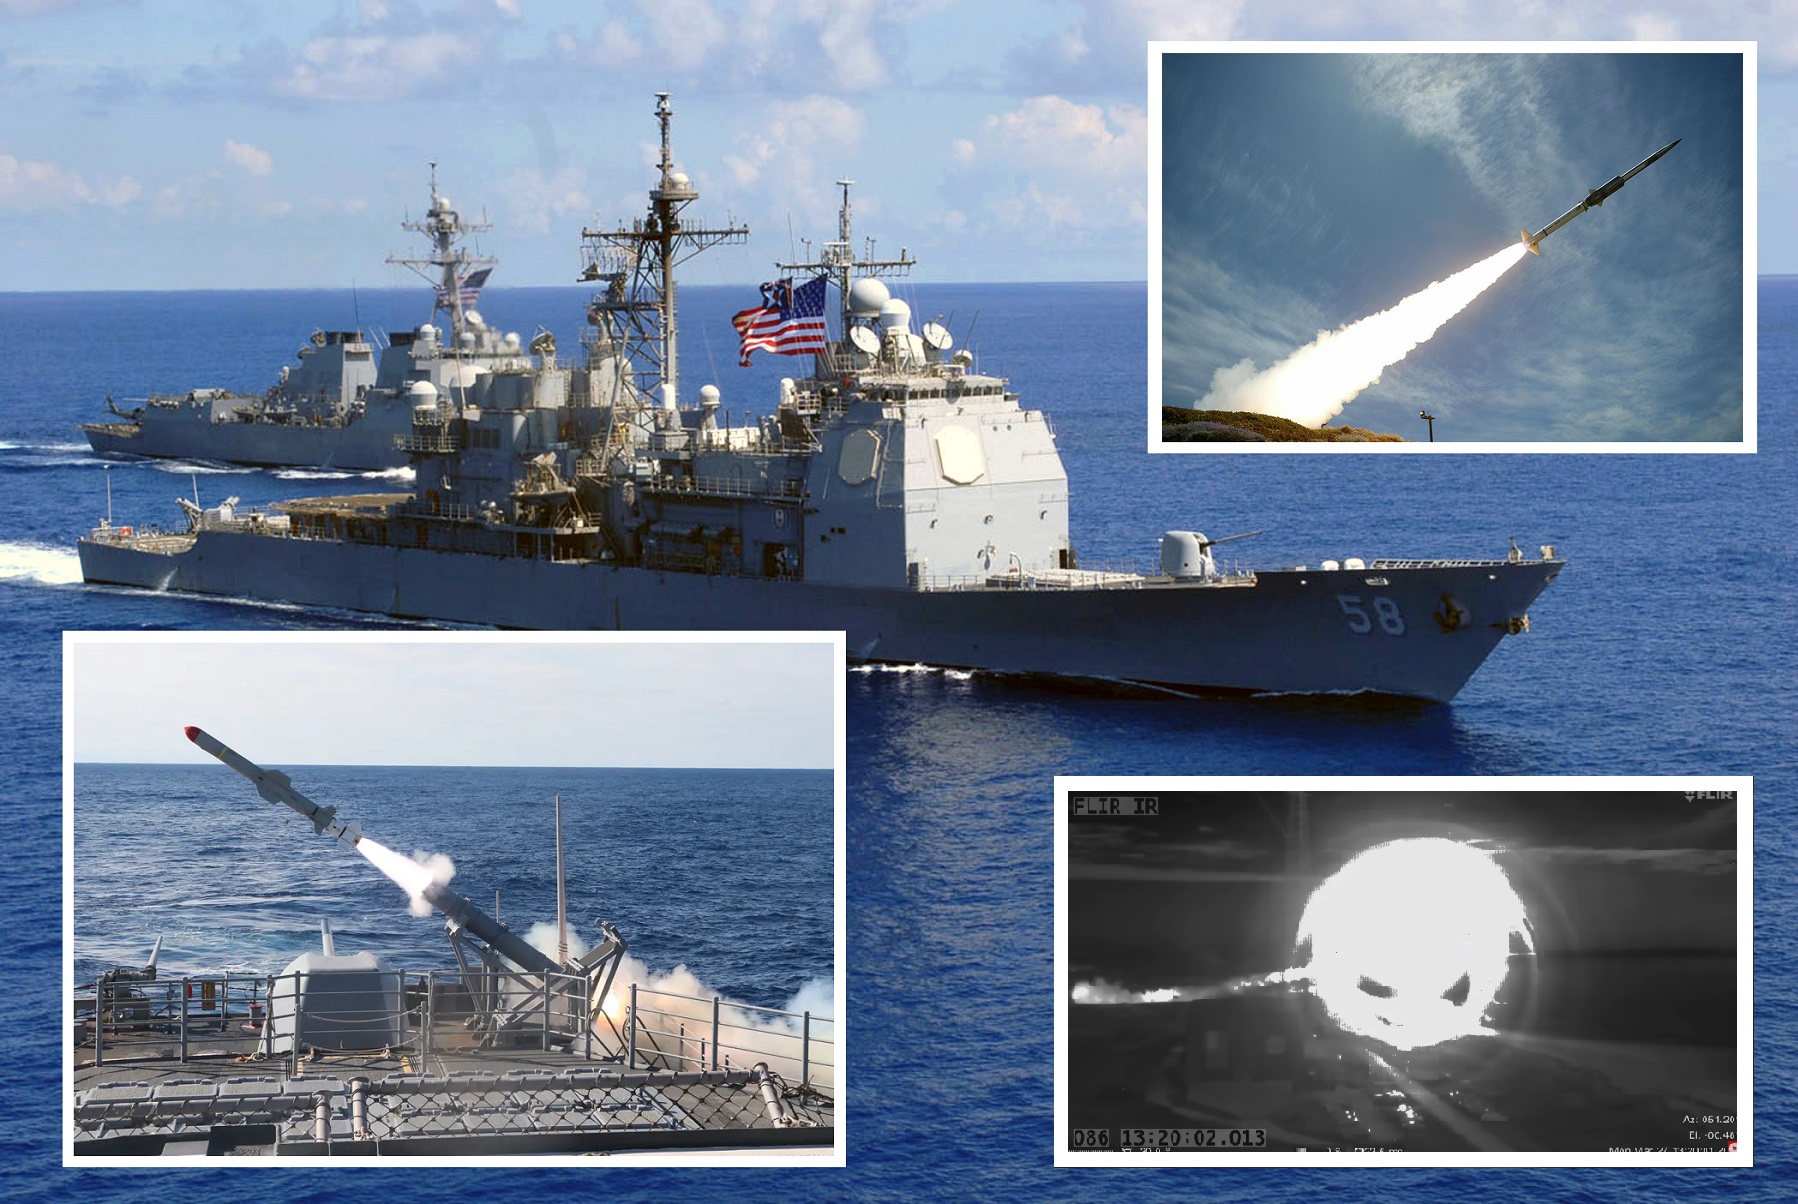 The destroyer USS Mason and cruiser USS Philippine Sea destroyed the supersonic target GQM-163 Coyote with two SM-2 missiles in seconds